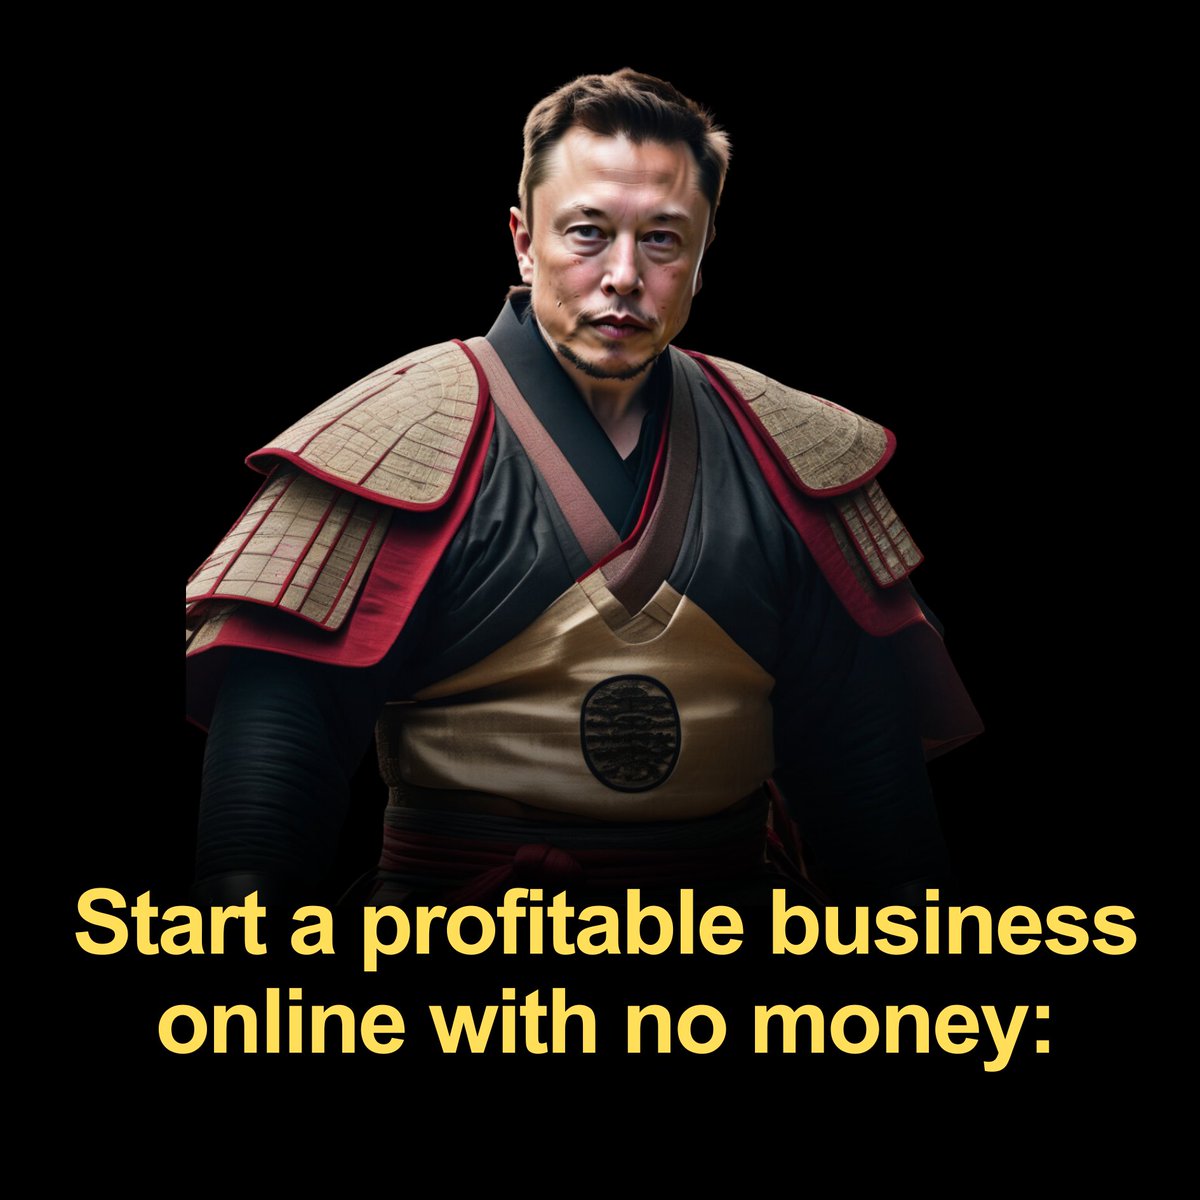 How to start a profitable business online with no money: (Bookmark 🧵 for later)